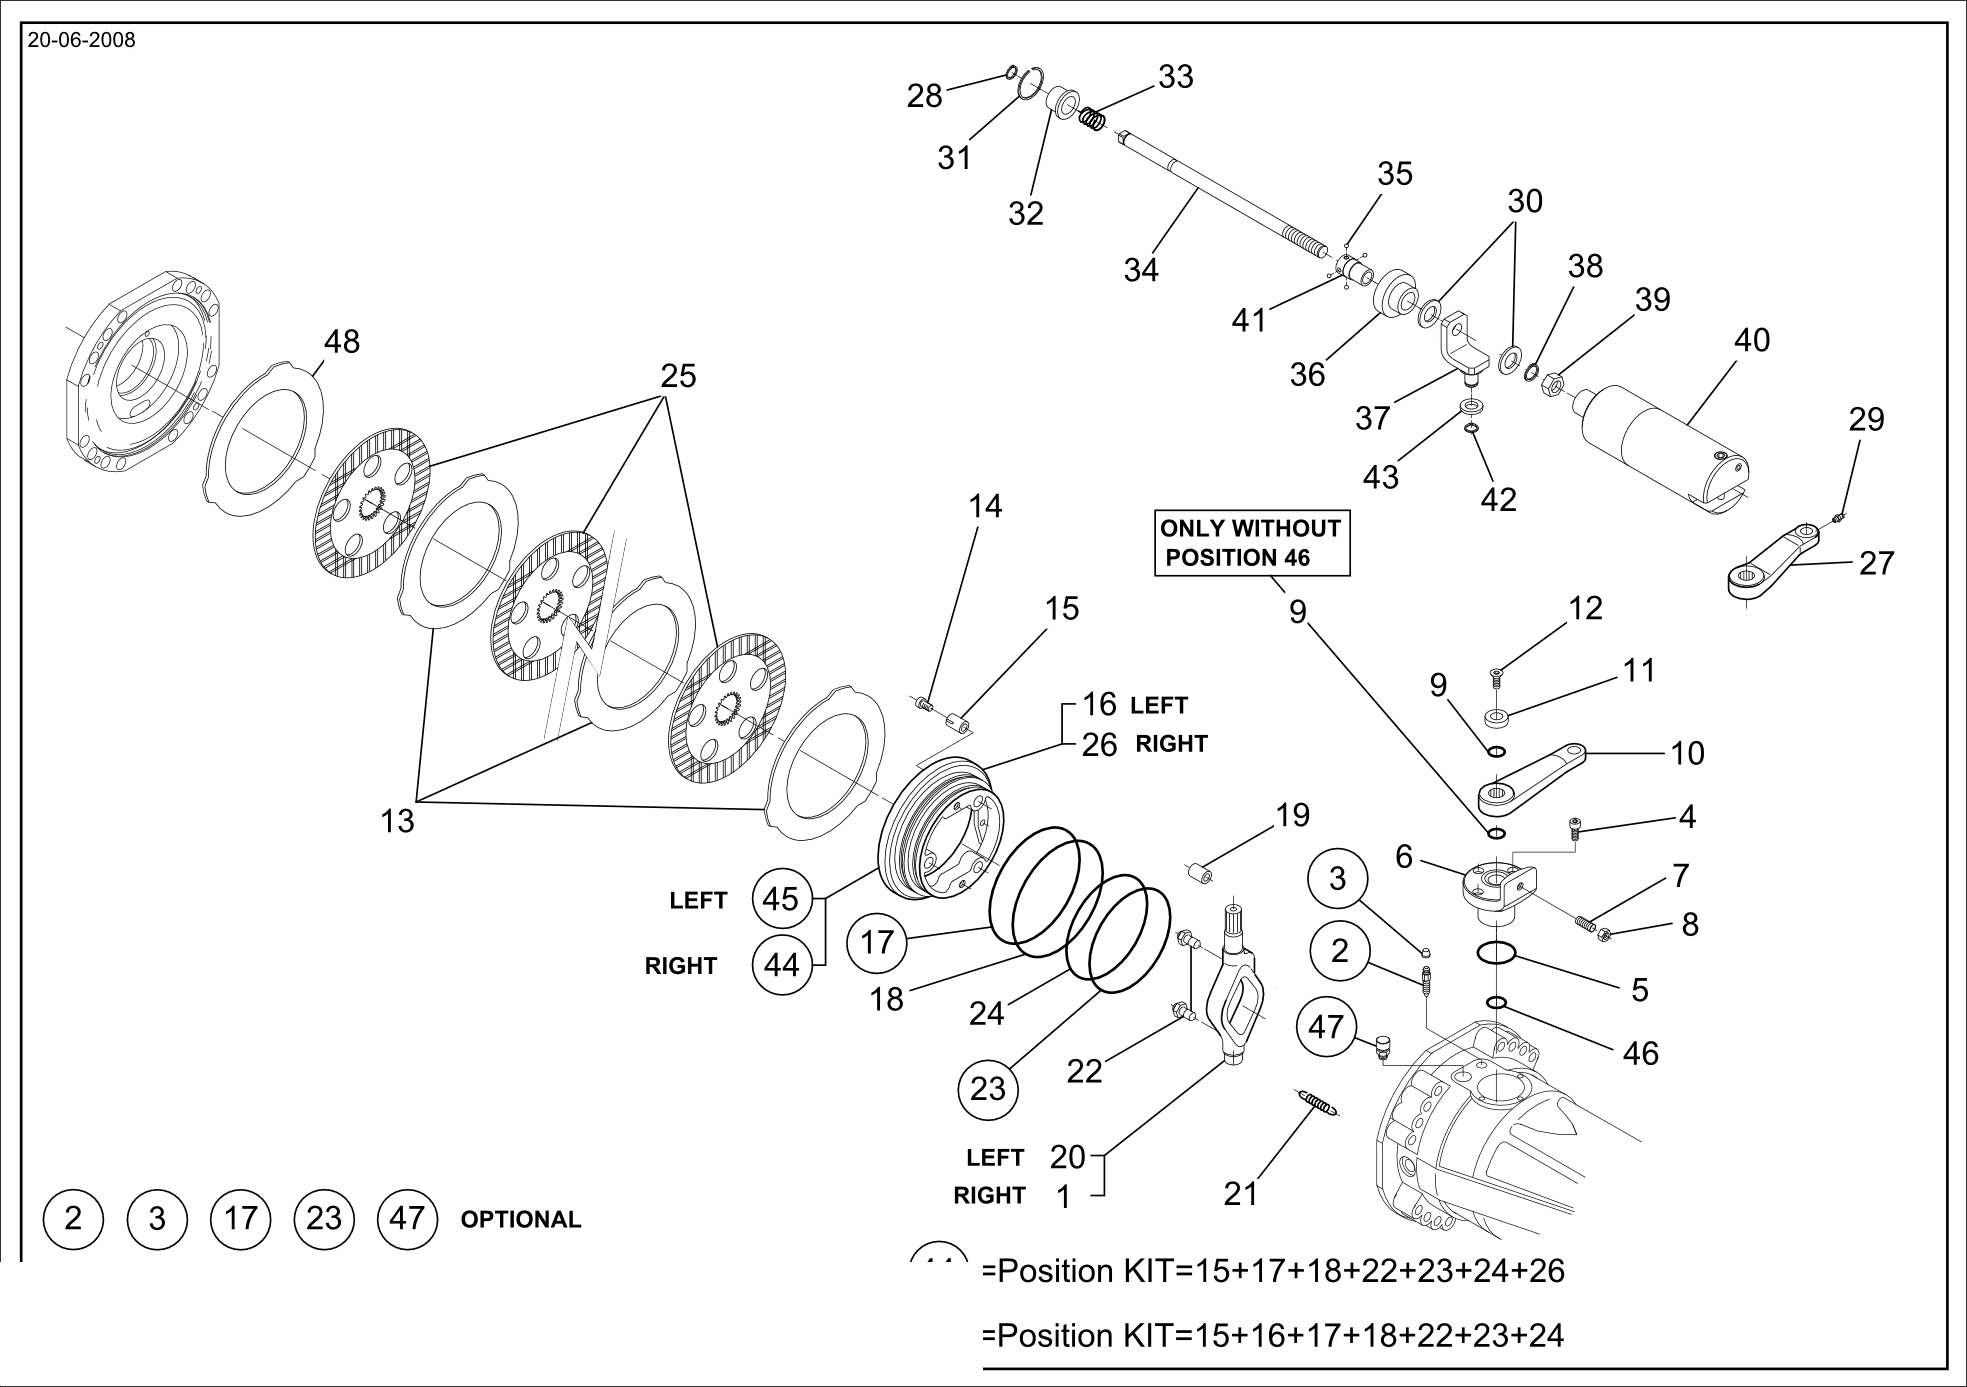 drawing for GHH 1202-0089 - SPRING (figure 3)